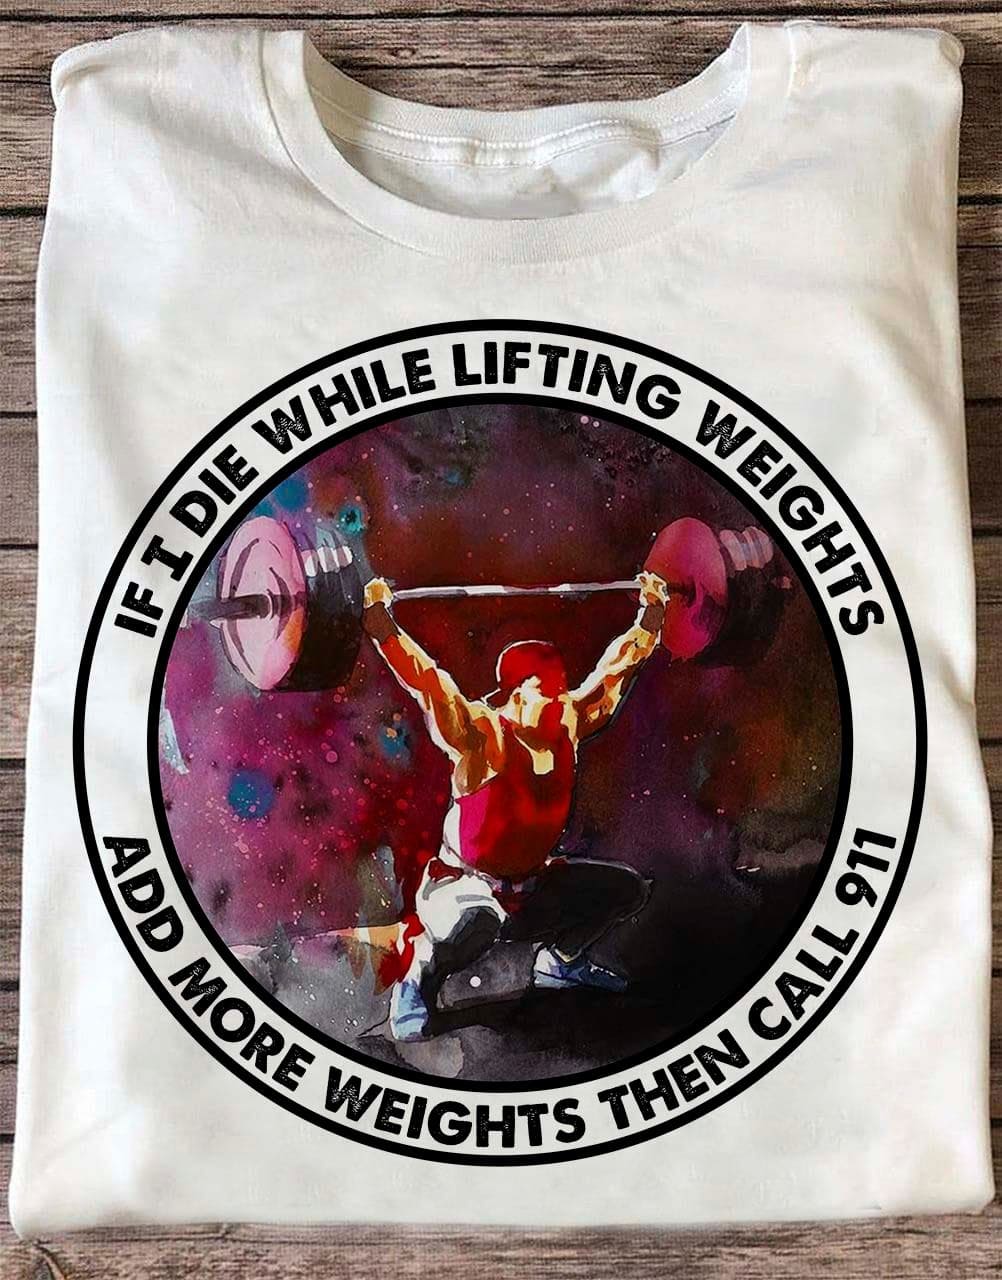 If I die while I lifting weights add more weights then call 911 - Man lifting weights